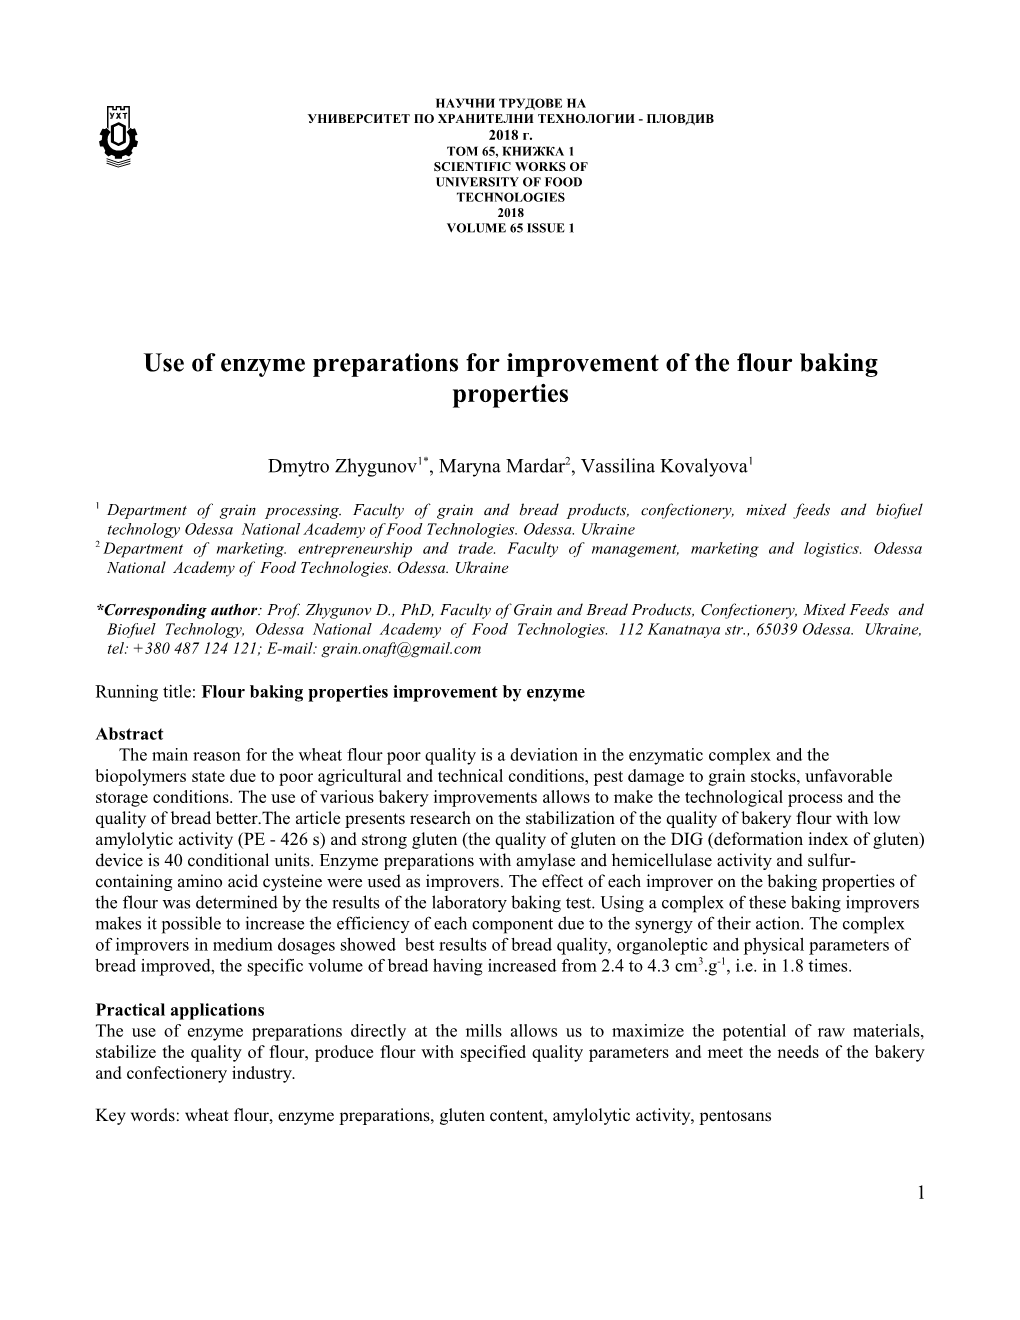 Use of Enzyme Preparations for Improvement of the Flour Baking Properties